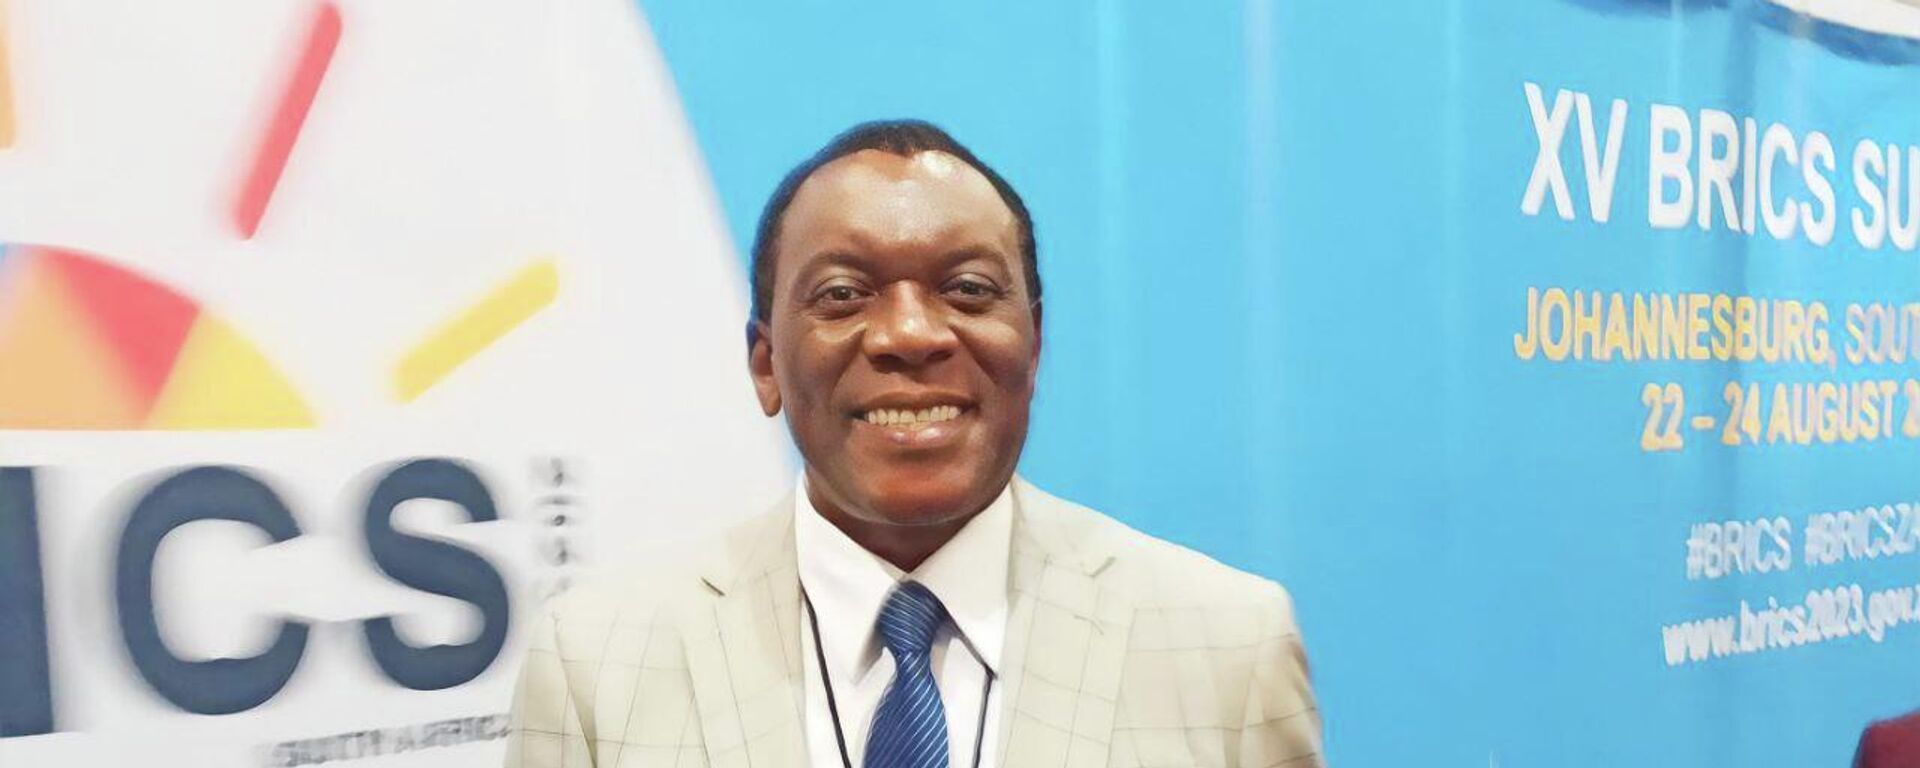 Dr. Siyabonga Cyprian Cwele, South Africa's Ambassador to China and former Minister of Home Affairs, poses for a photo on the last day of the 15th BRICS summit, held in Johannesburg, South Africa, on August 22-24.  - Sputnik Africa, 1920, 24.08.2023